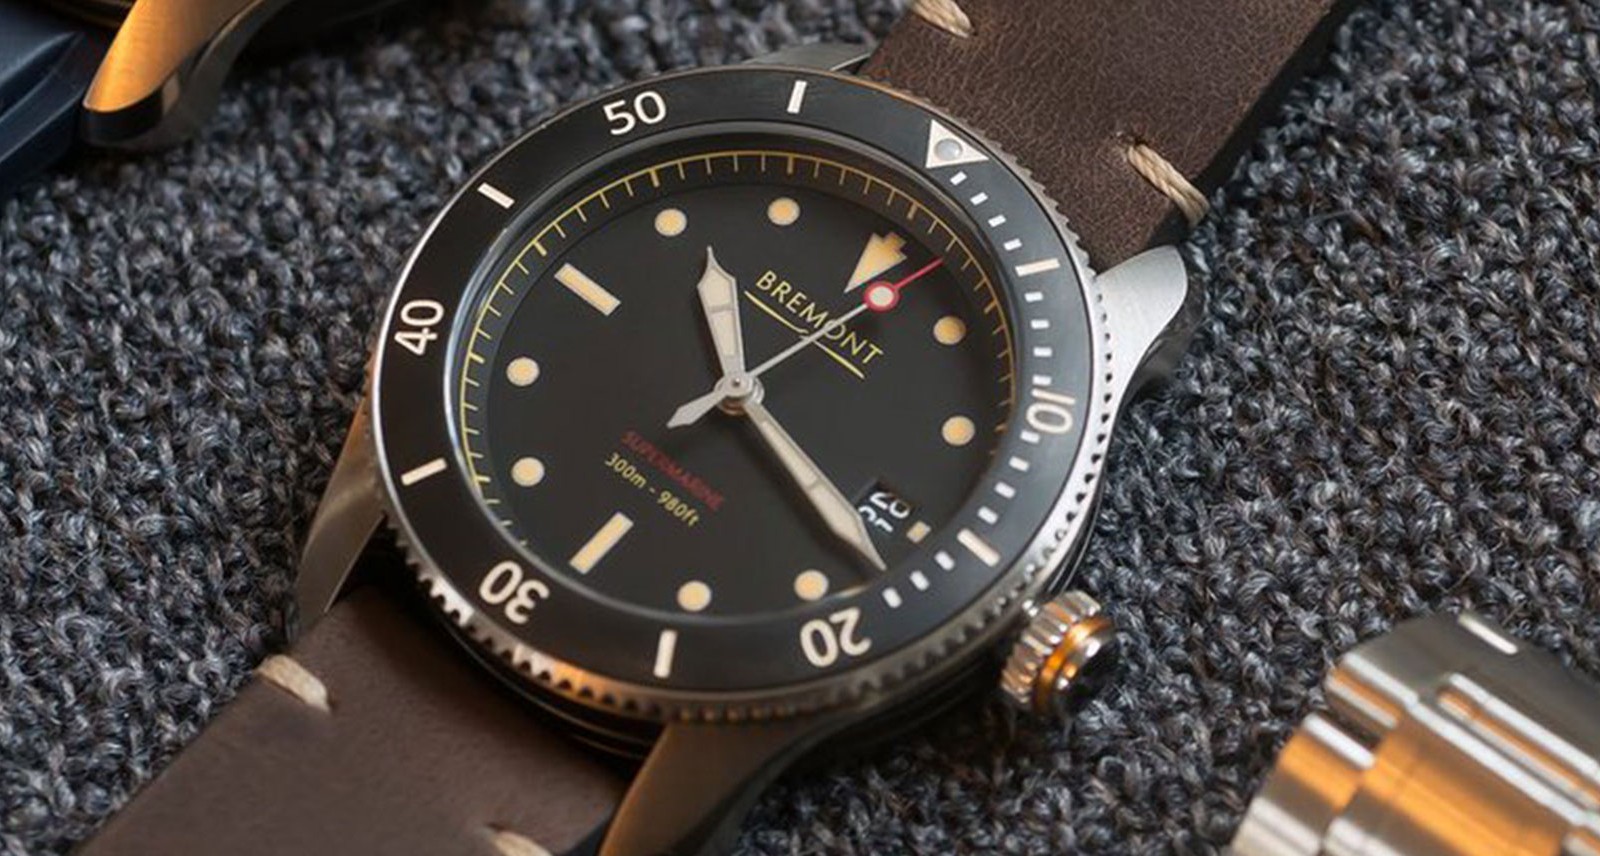 Bremont’s Newest Dive Watches Are a Slim, Striking Tribute to British